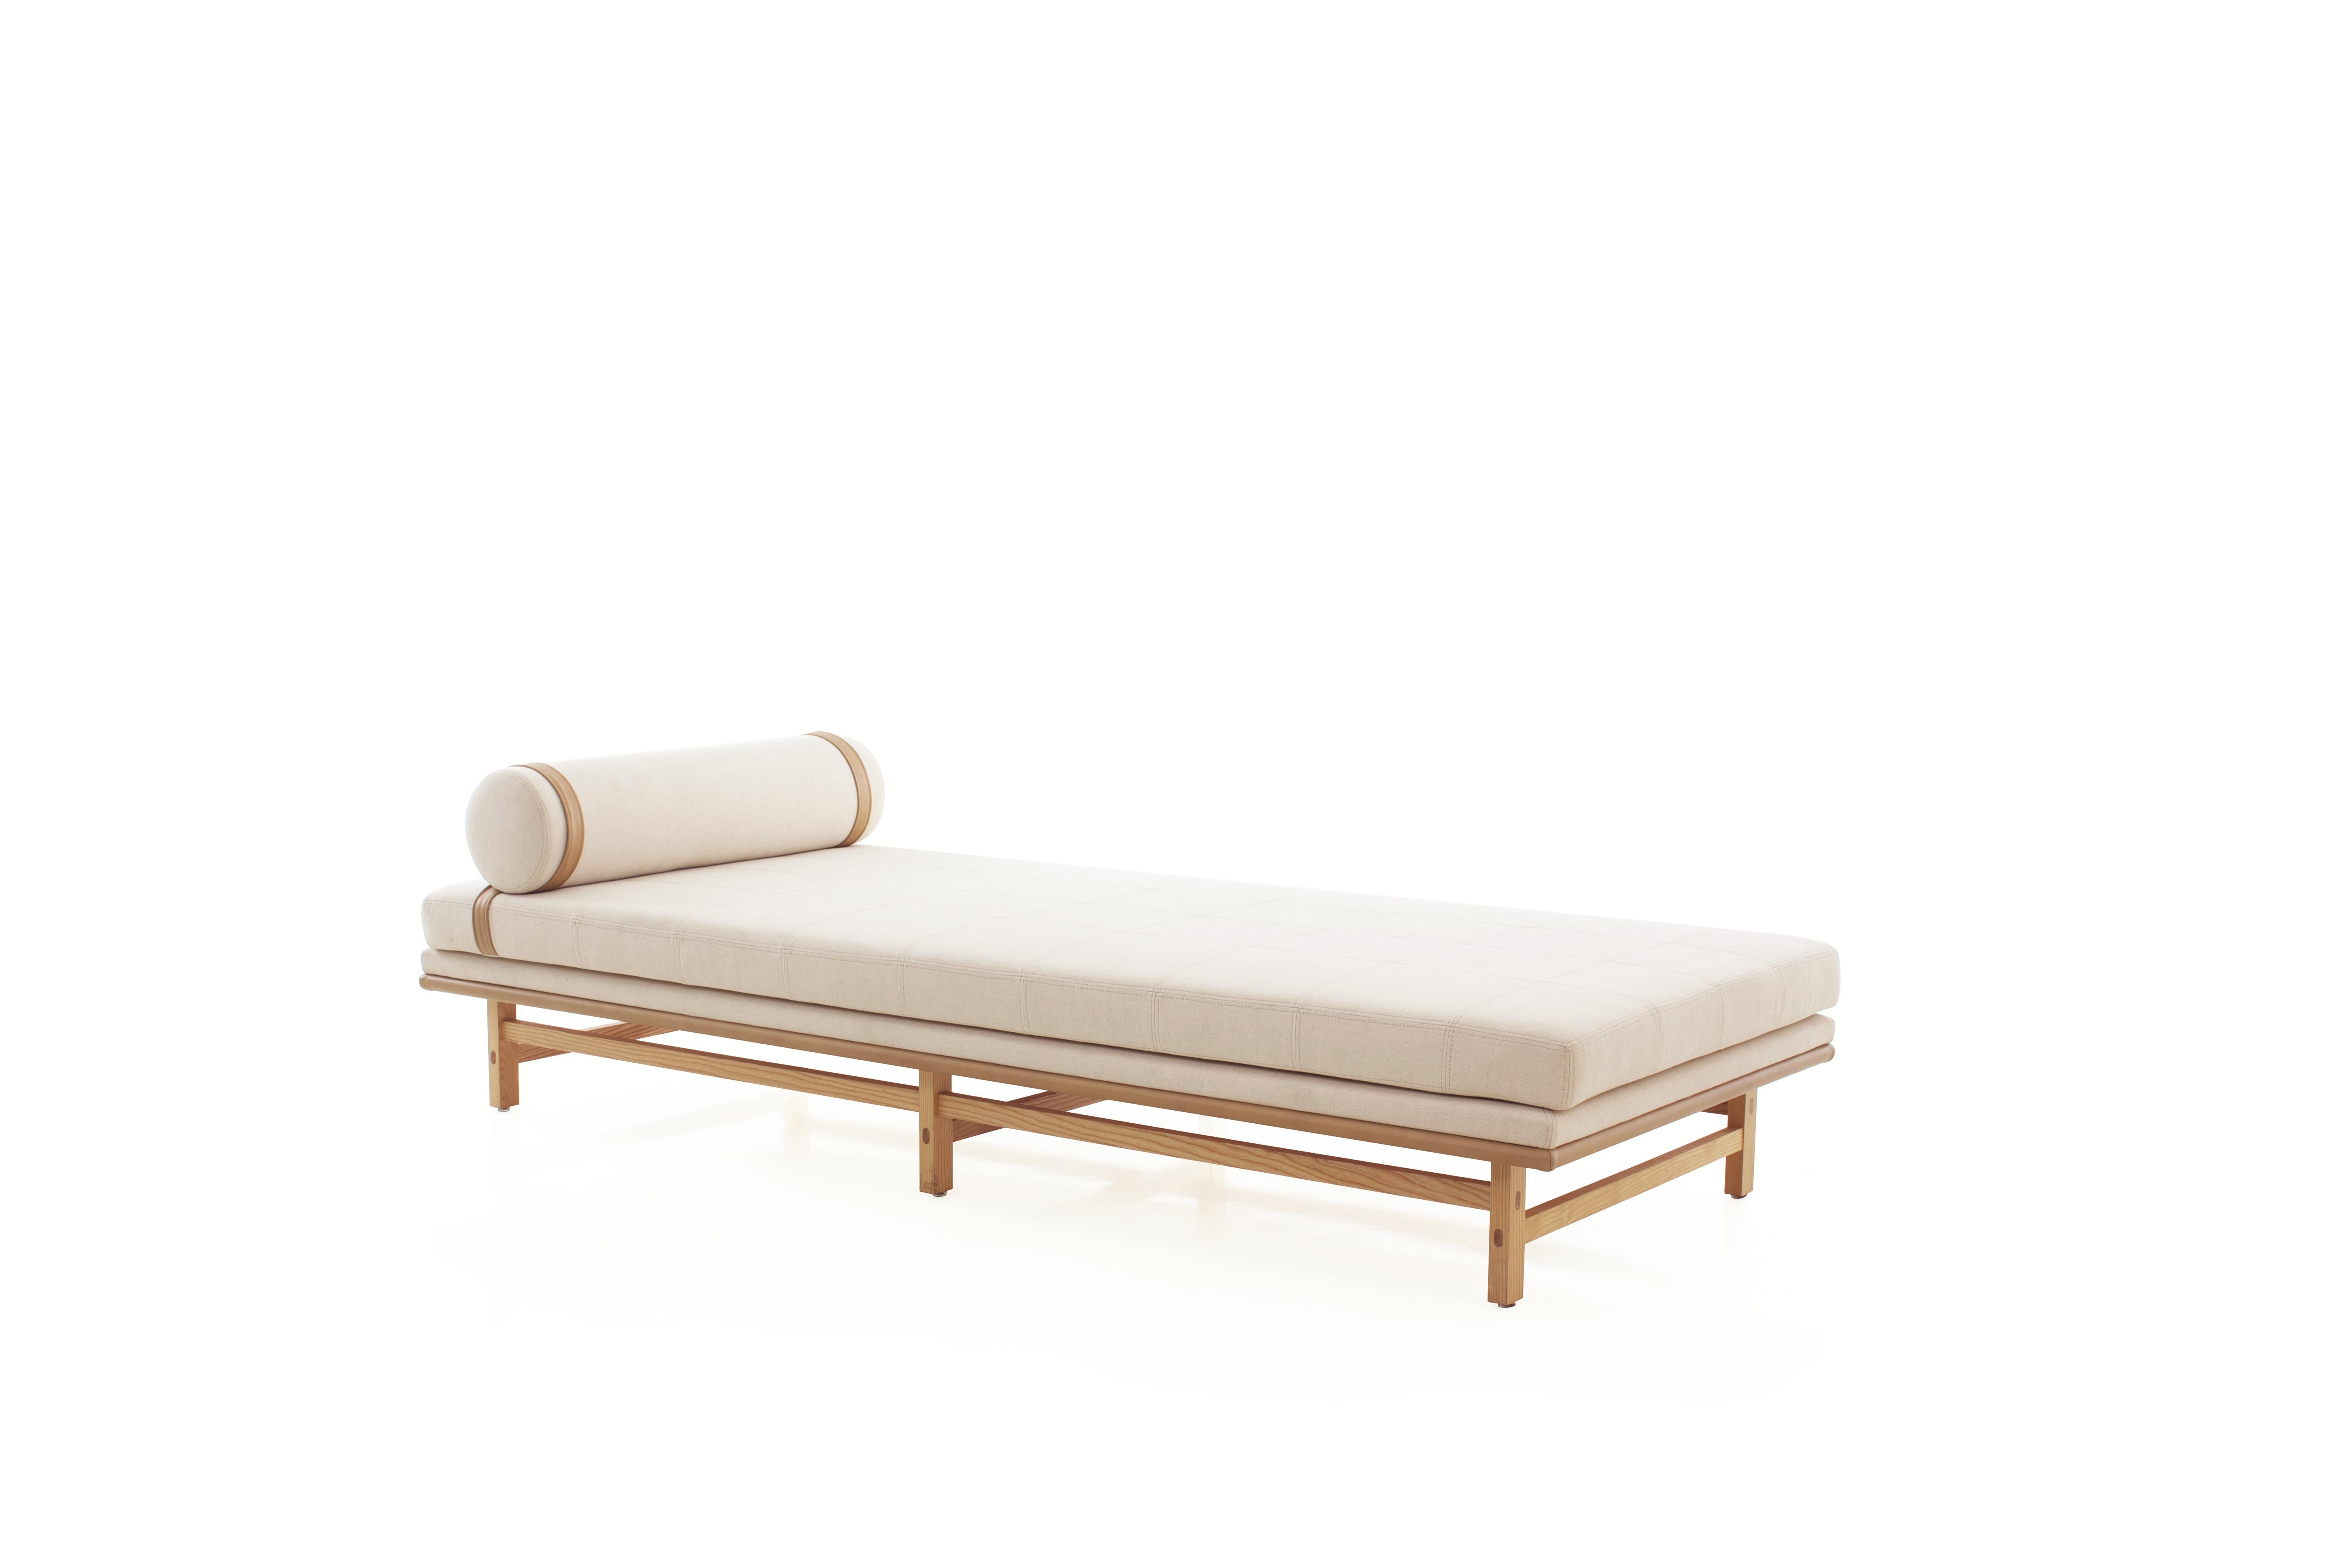 Chinese Solid Wood and Linen Daybed, SW